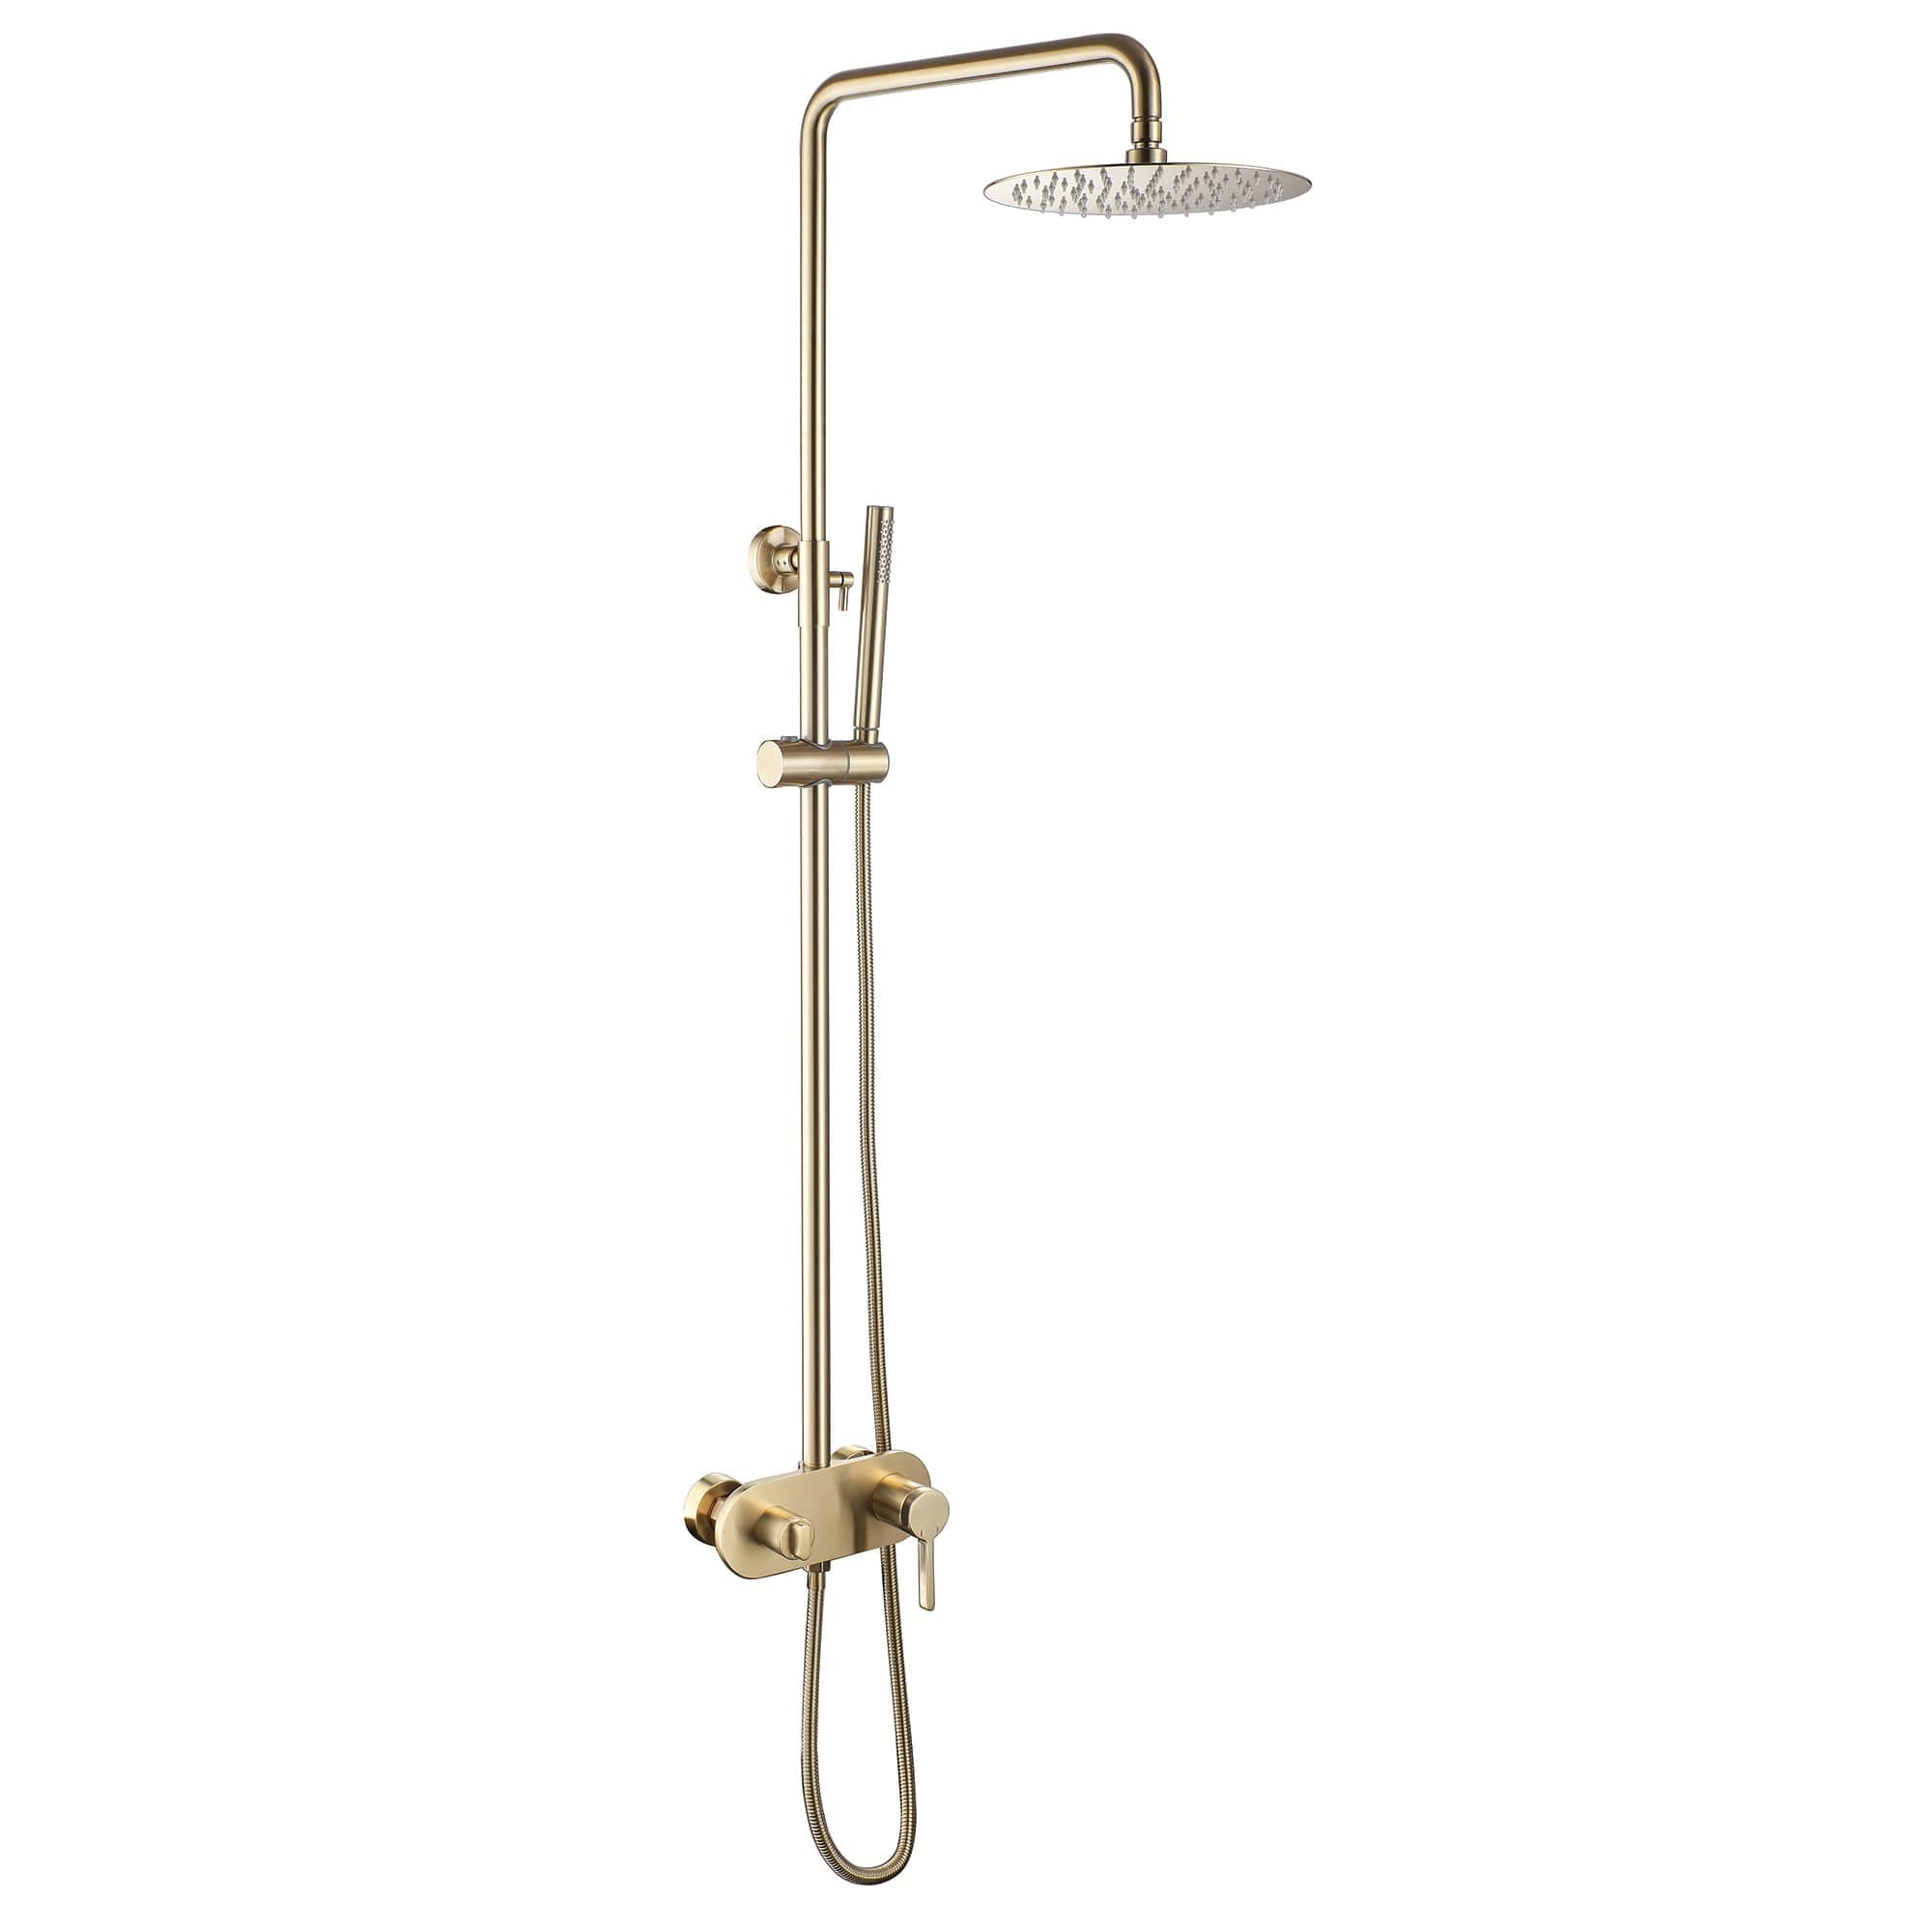 Wall-mounted complete shower system with soap dish (not including the  rough-in valve) - Bed Bath & Beyond - 38454601